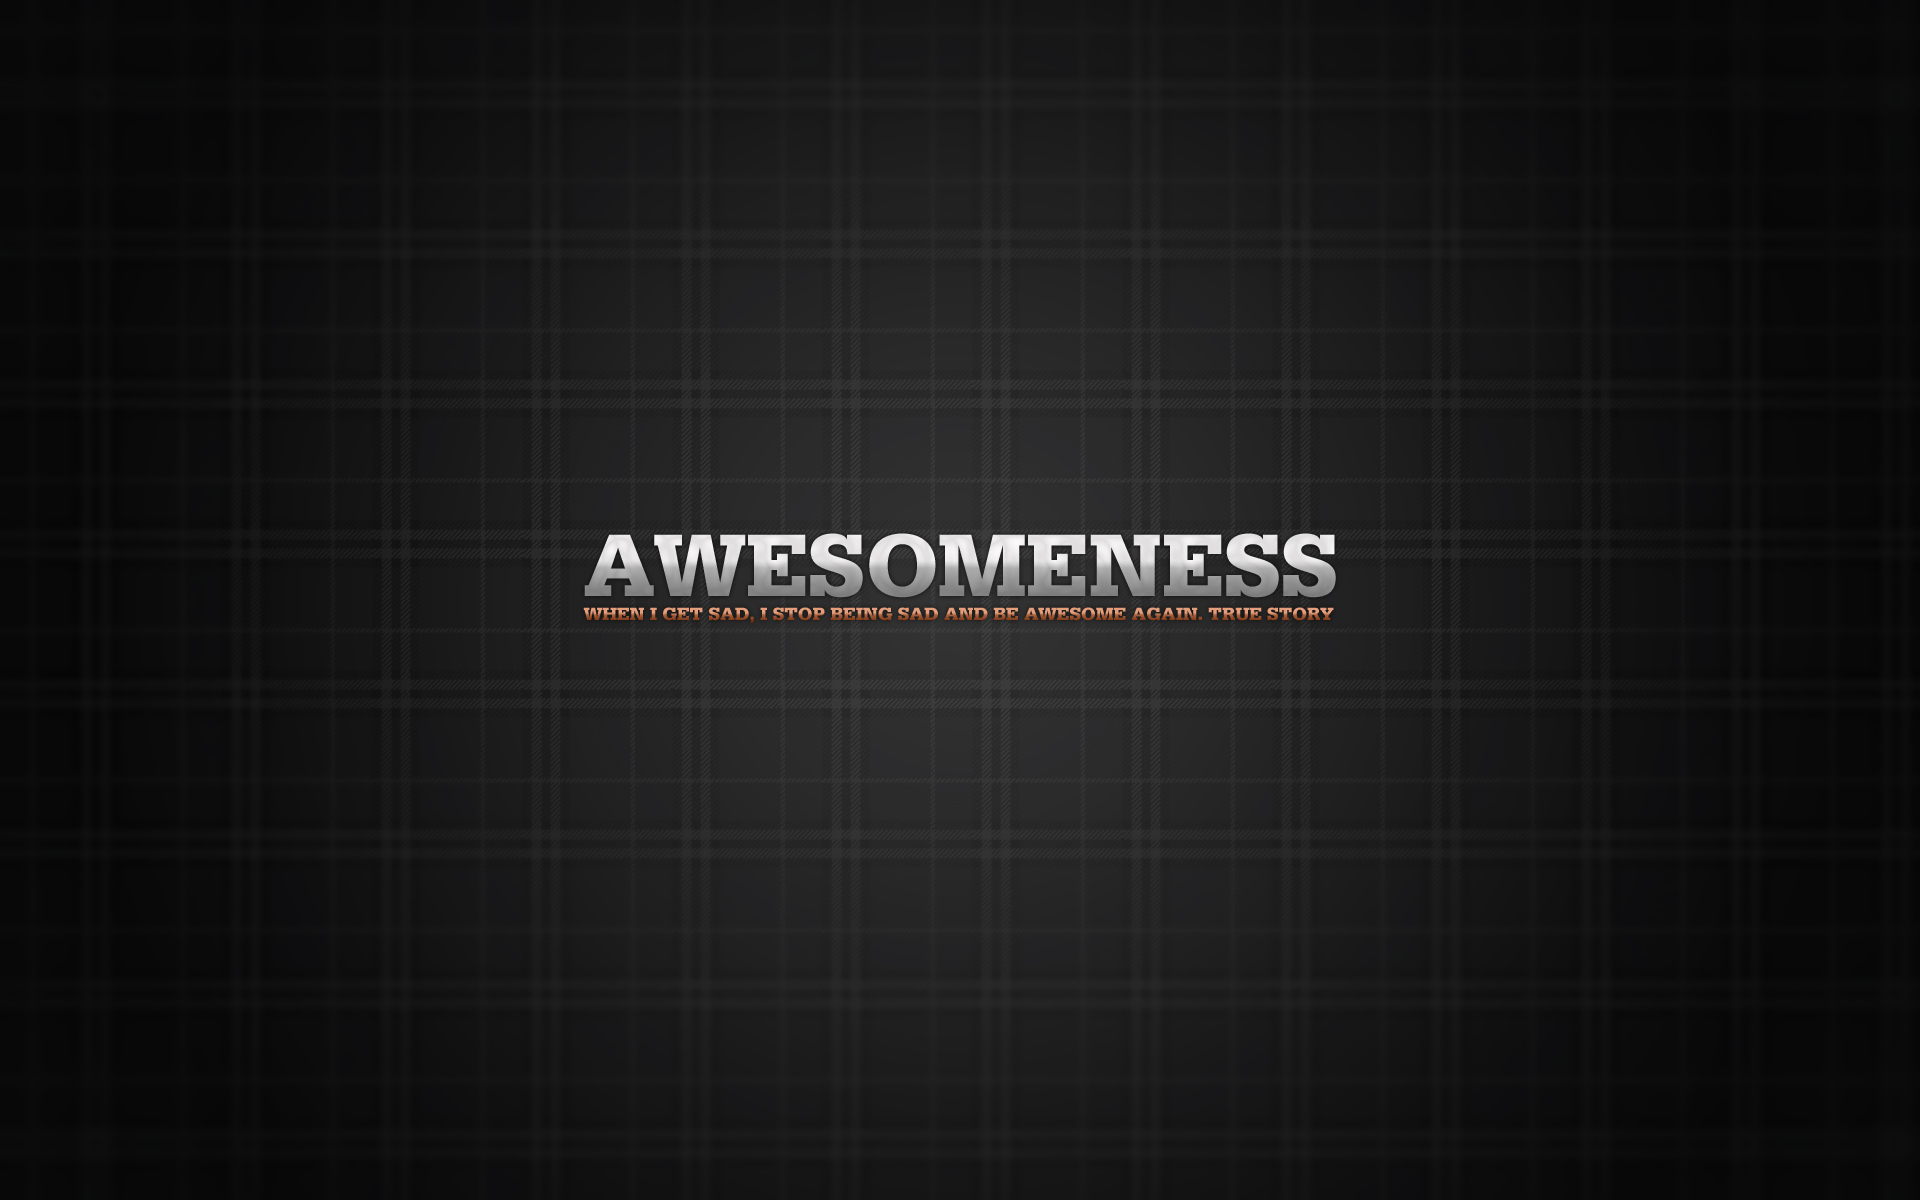 quotes, Barney Stinson, How I Met Your Mother, awesomeness - desktop wallpaper